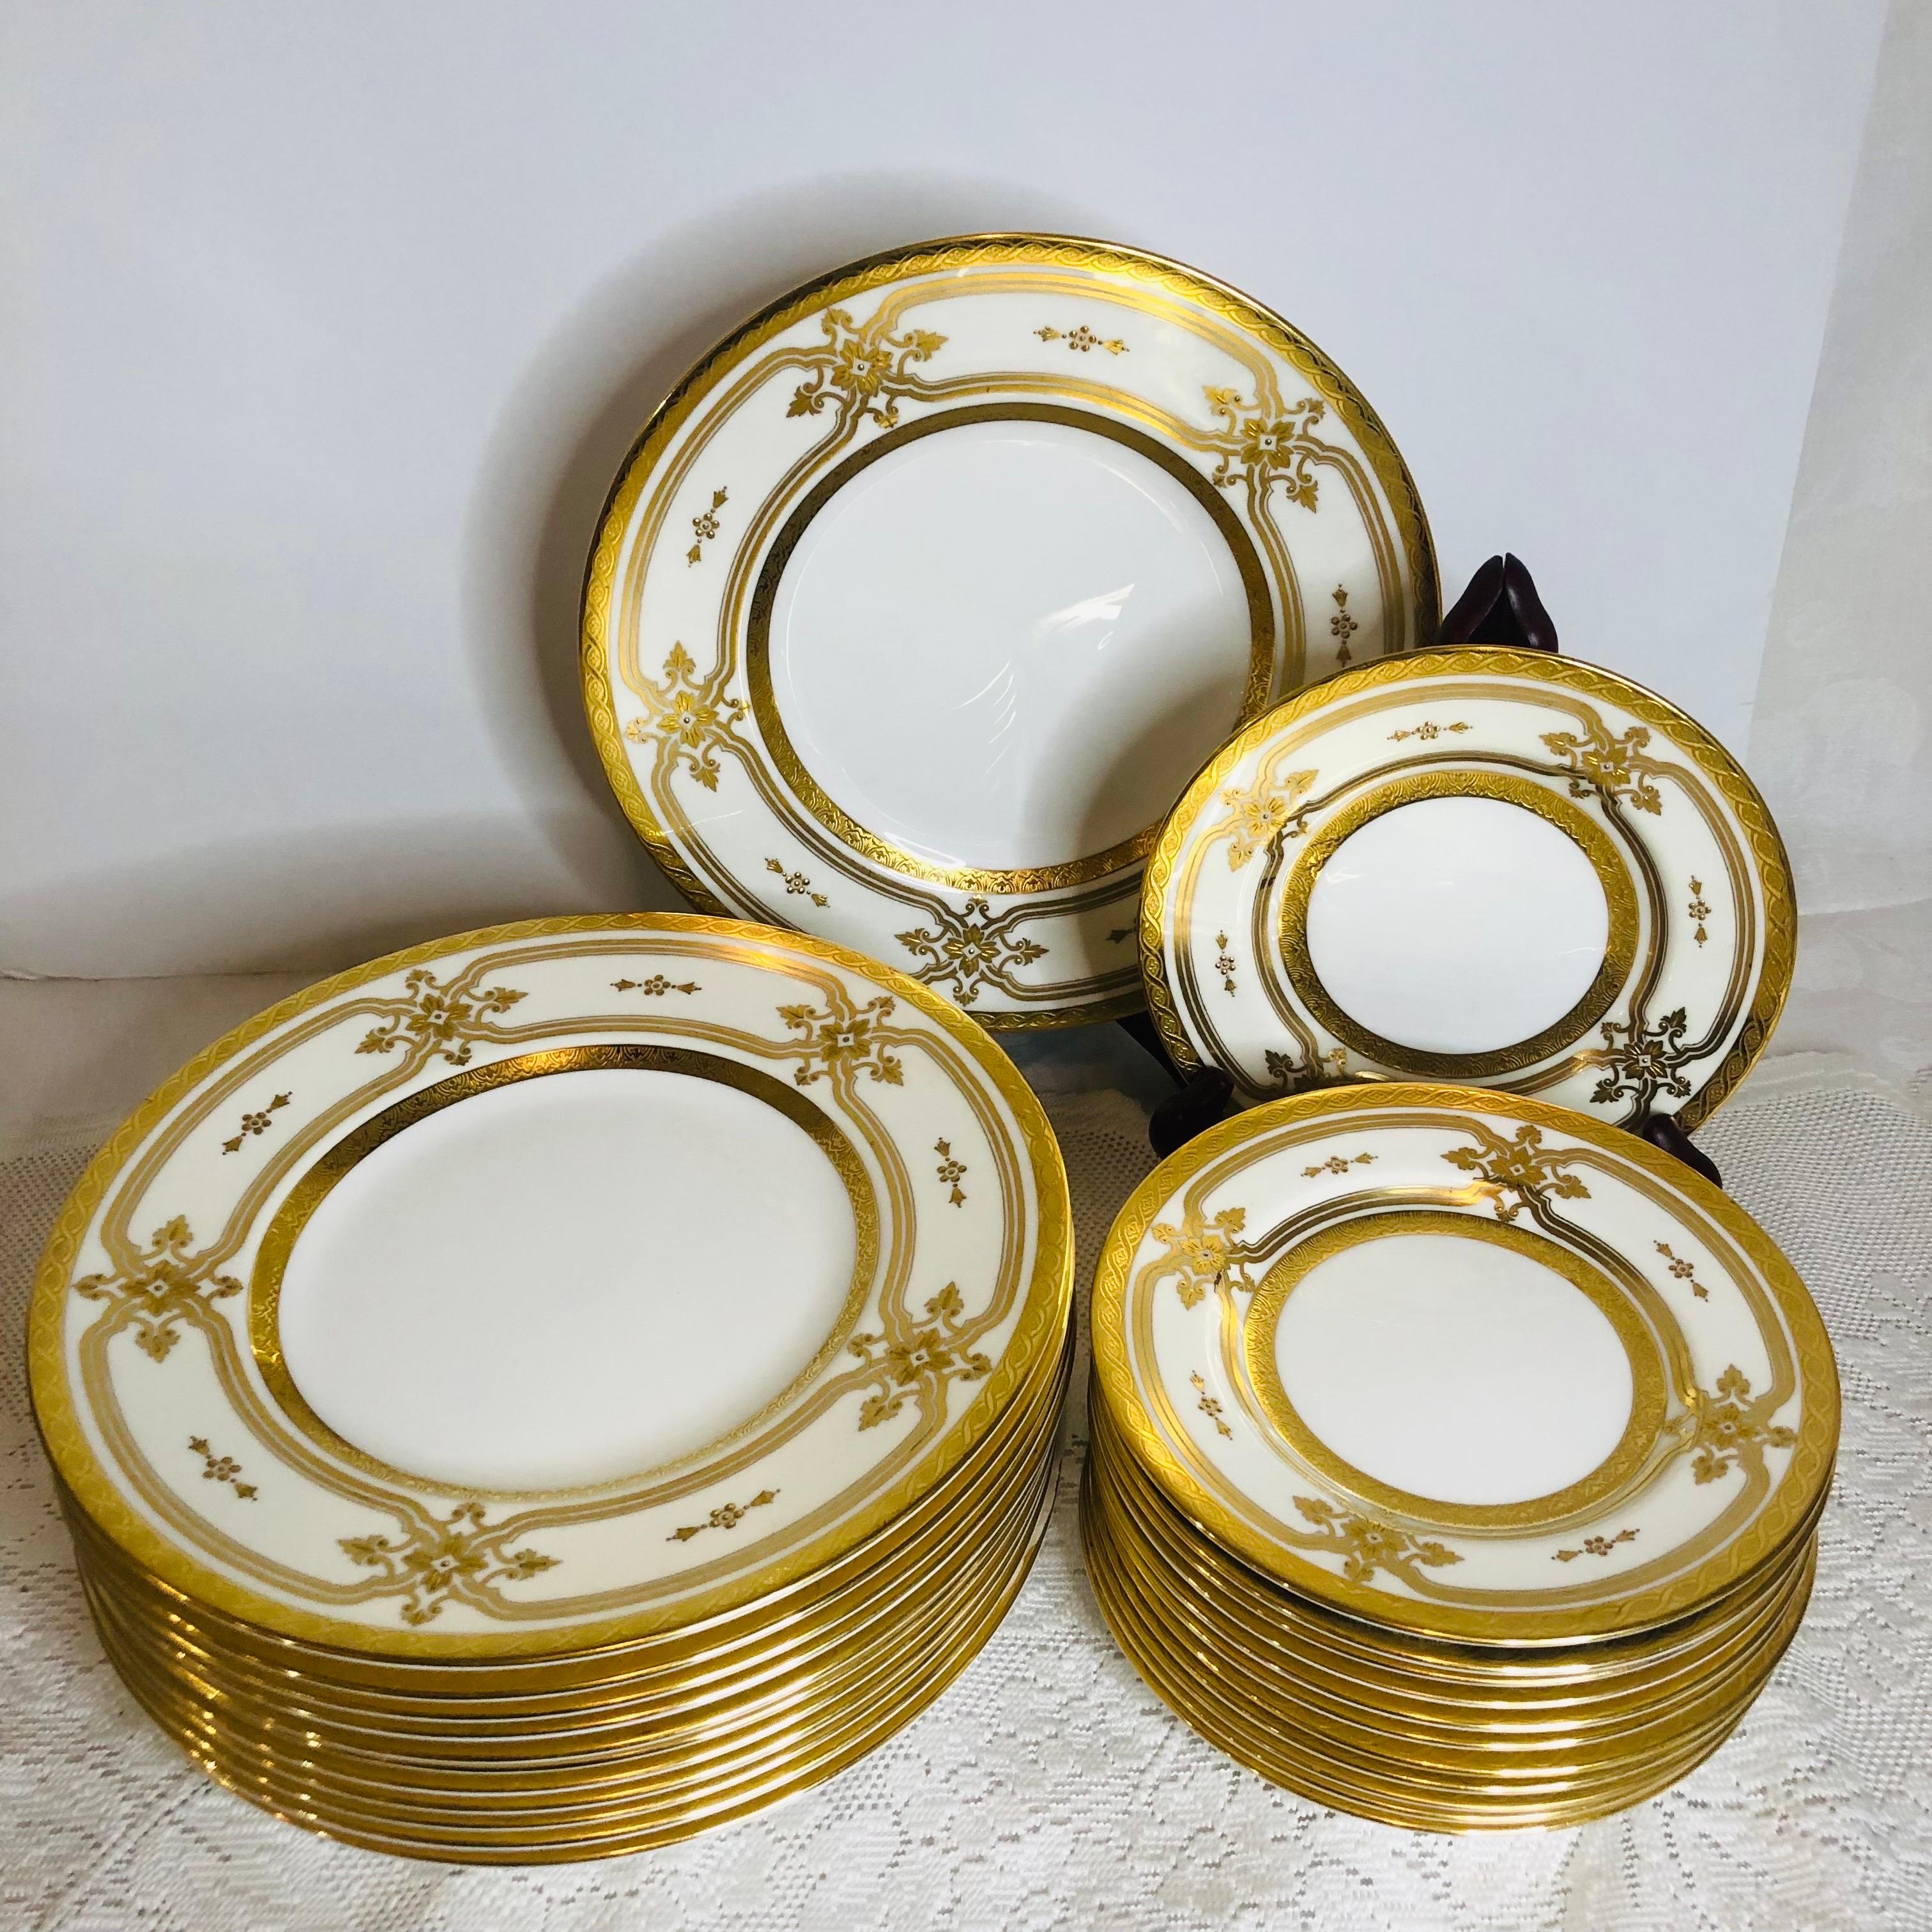 I am offering you this stunning set of Minton plates that were made exclusively for Tiffany and Company, New York. This set has 12 luncheon or dessert plates and 12 bread or appetizer plates. They are beautifully designed with a white background and